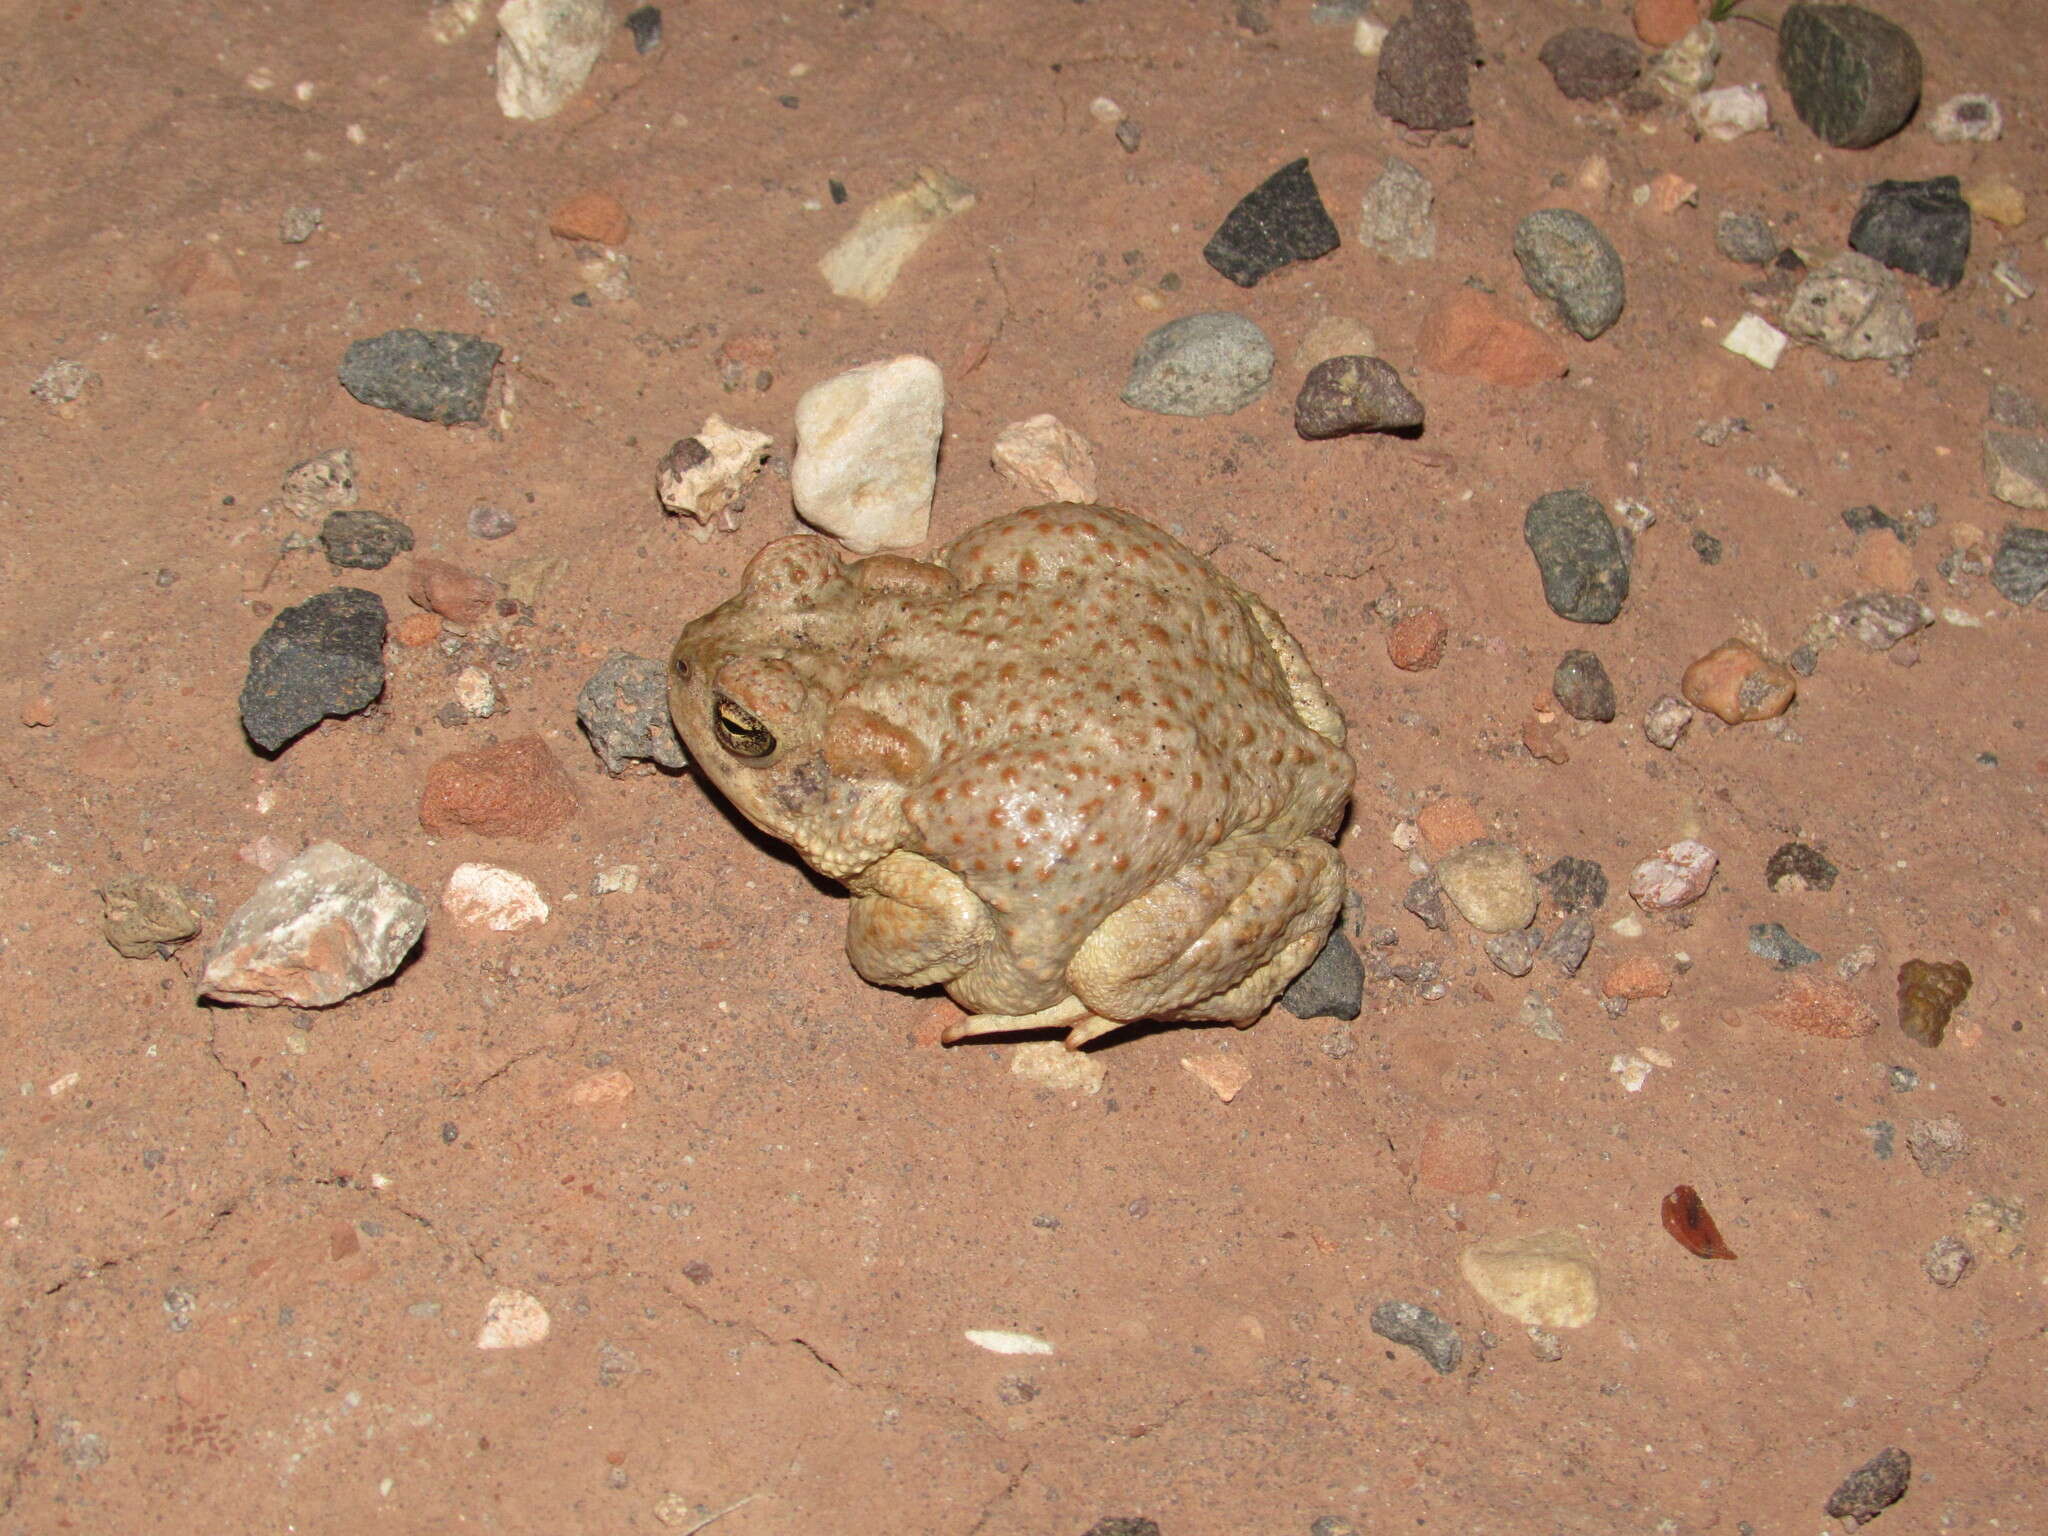 Image of southwestern toad